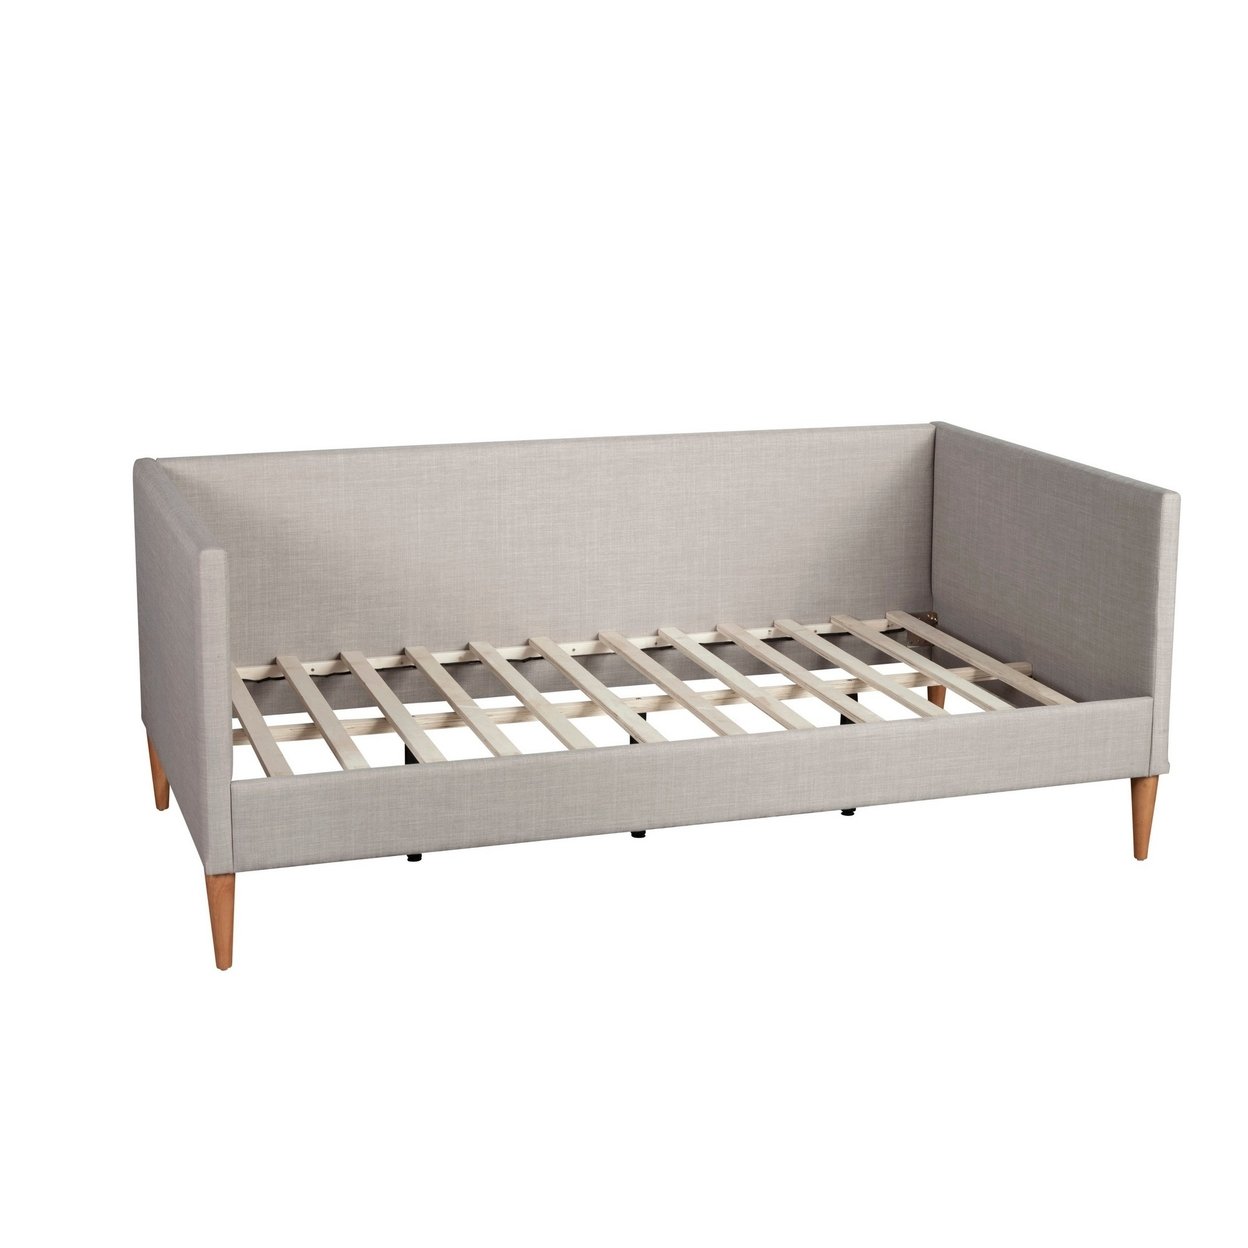 Twin Daybed With Wooden Frame And Fabric Upholstery, Gray- Saltoro Sherpi